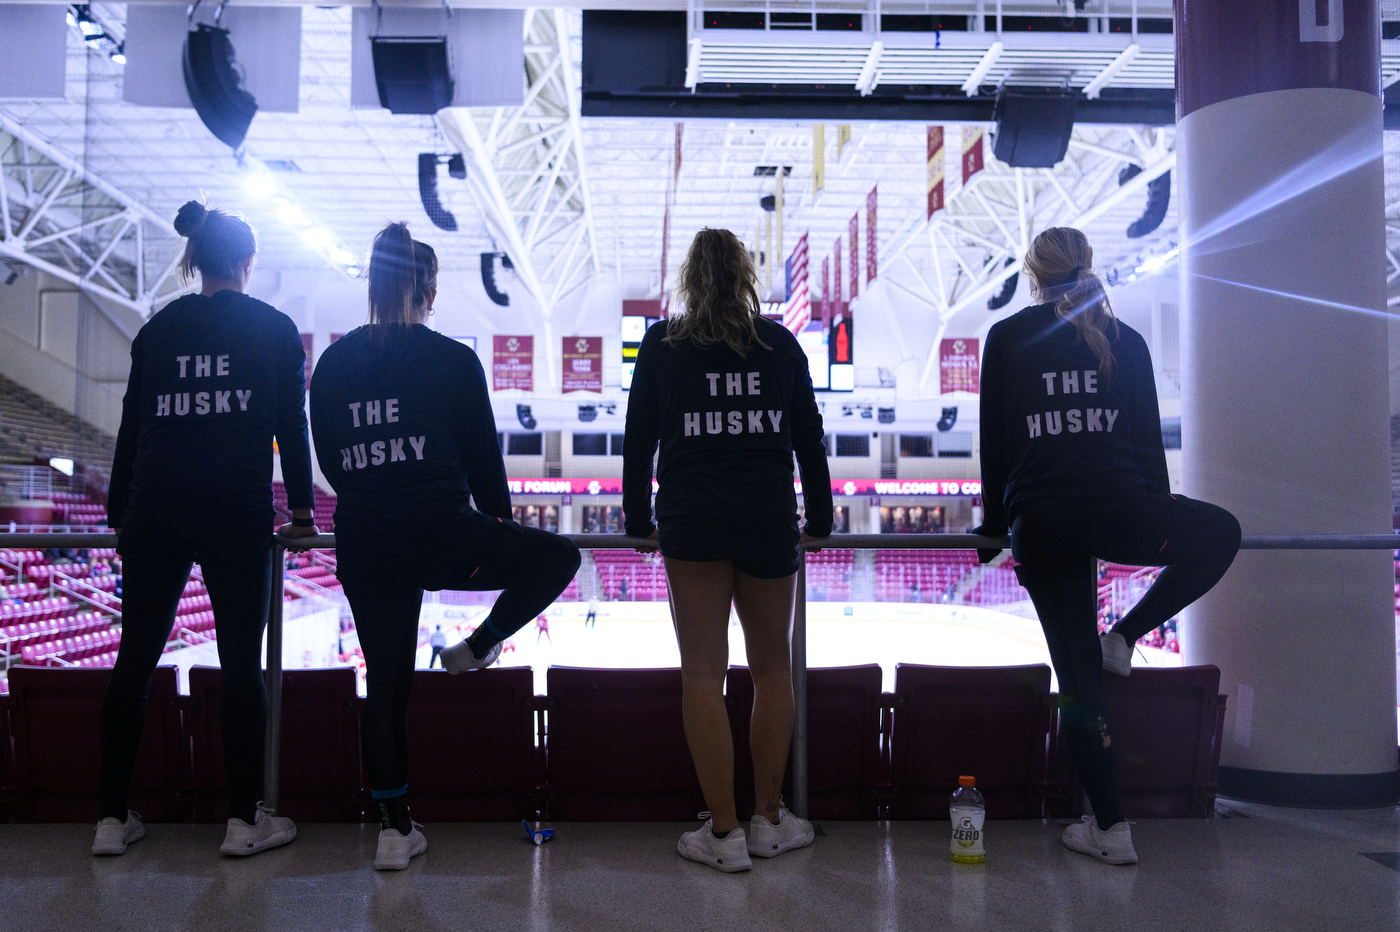 four players stand and stretch while overlooking an empty ice hockey arena